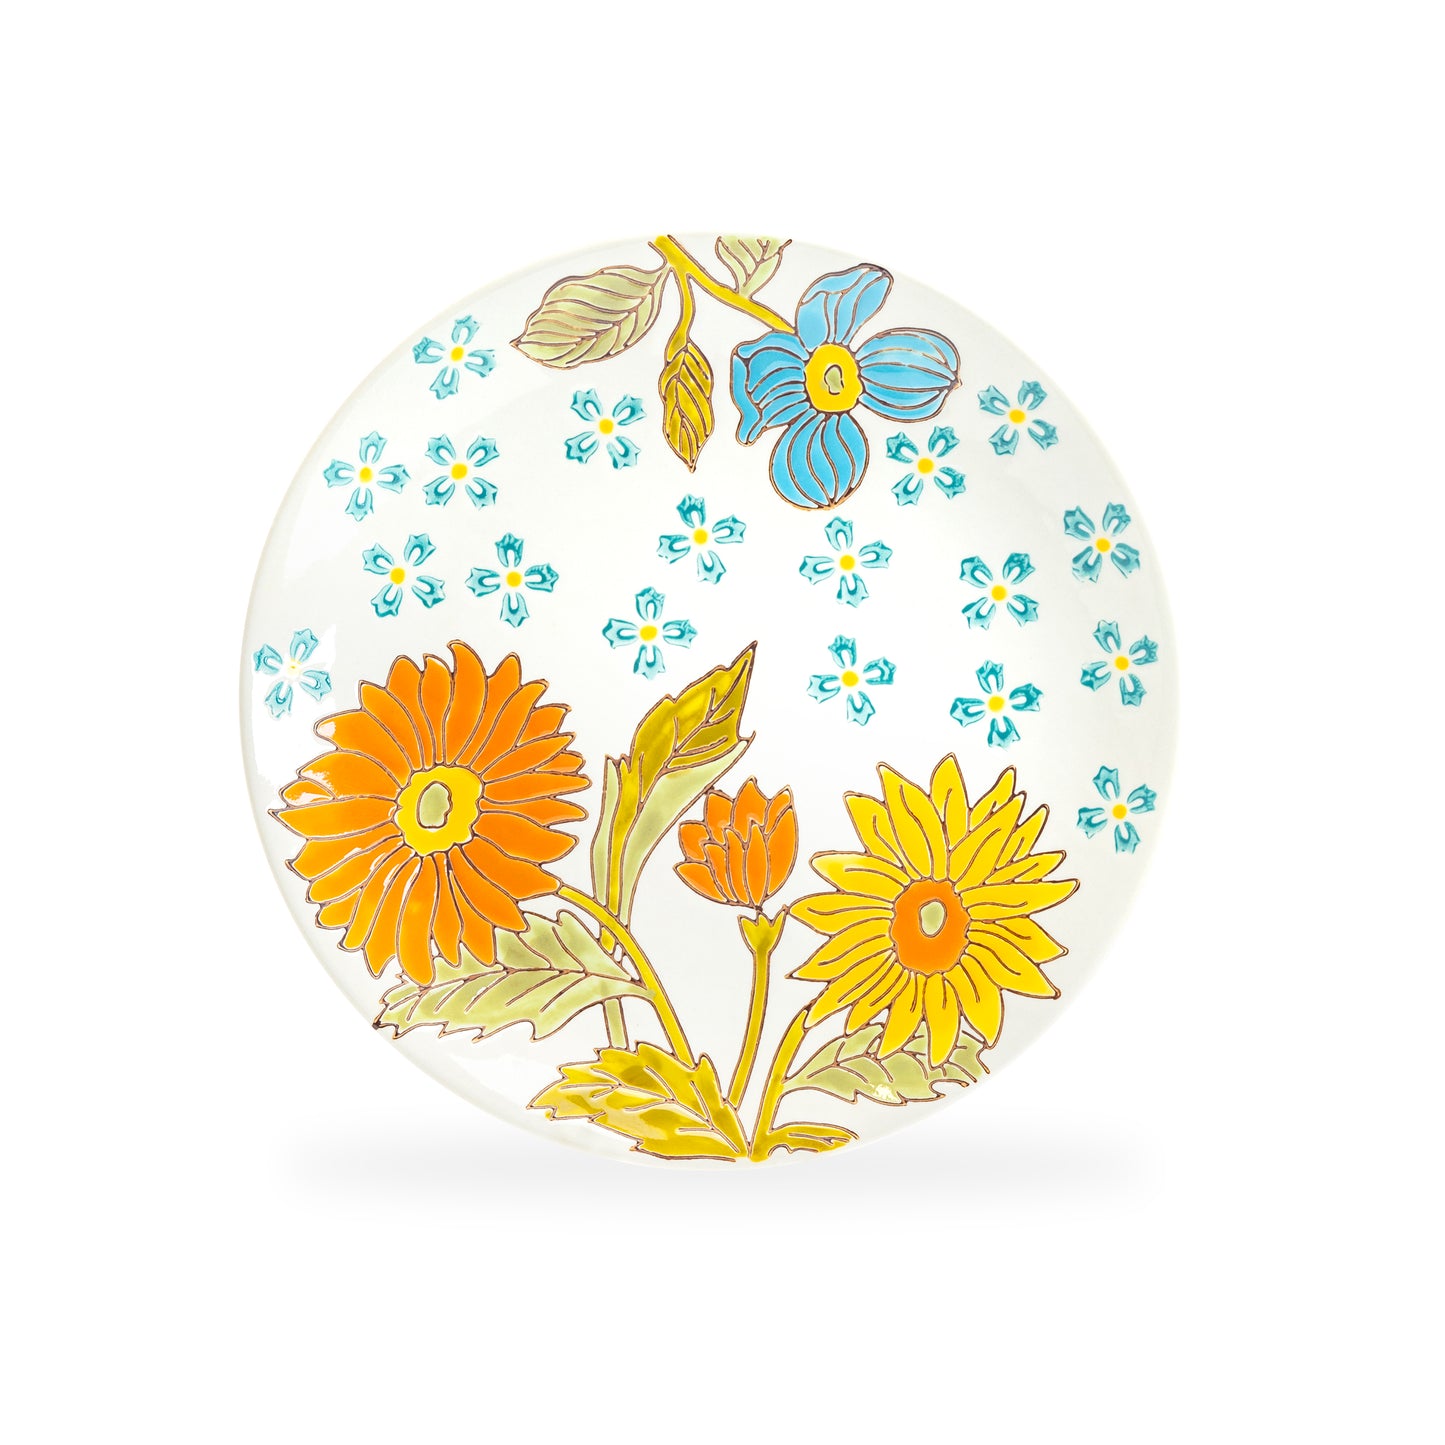 Dutch Wax 8" Daisy Hand Crafted and Painted Dessert / Salad Plate